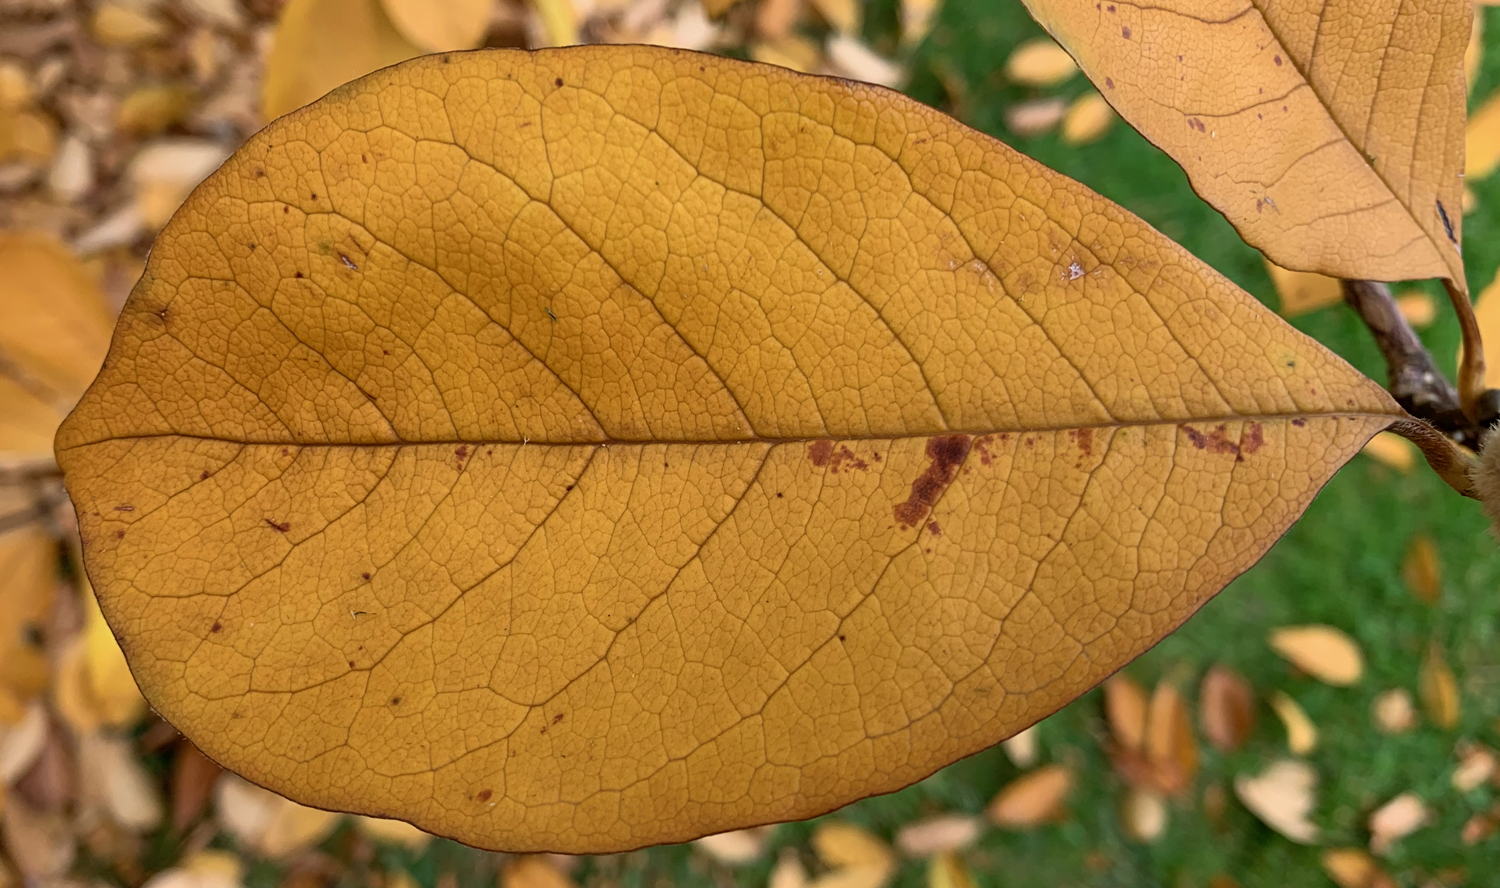 Photograph of a magnolia leaf that has turned yellow in the fall. The reticulate venation pattern is clearly visible on the leaf surface.